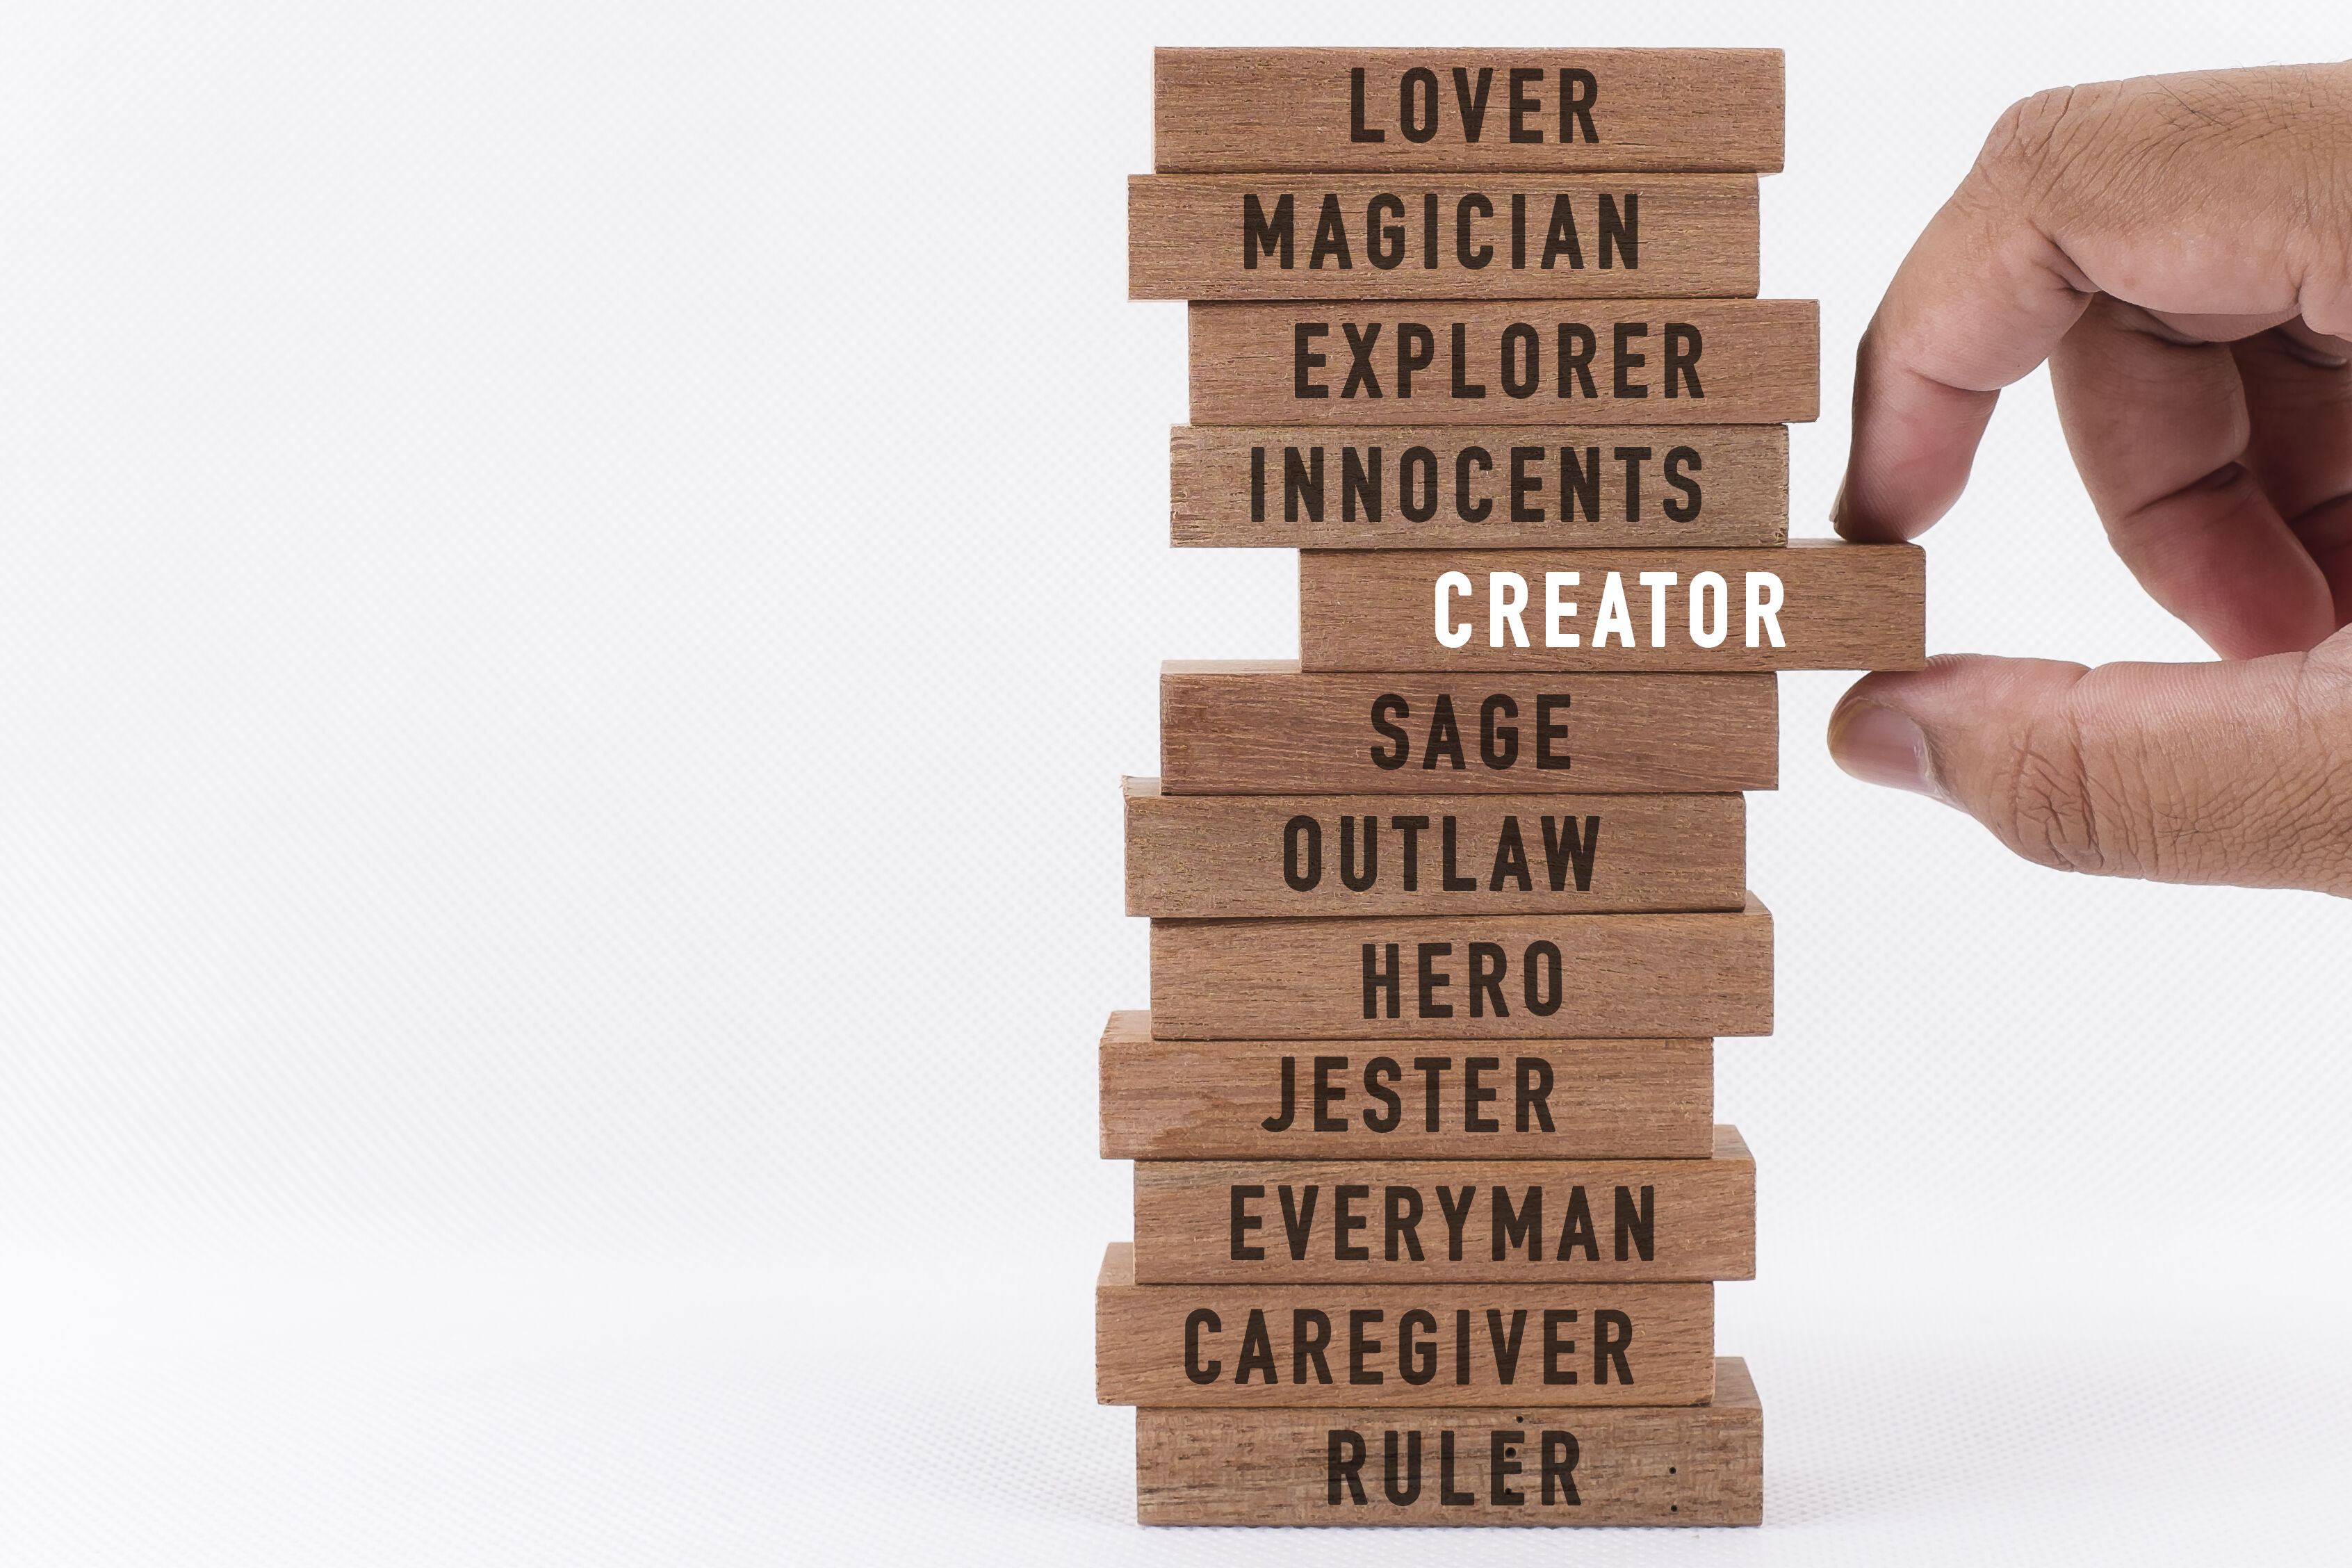 wooden blocks stacked on top of each other with the words lover, magician, explorer, innocents, creator, sage, outlaw, hero, jester, everyman, caregiver, and ruler written individually on each. The creator block is being pulled out from the middle by a person's thumb and forefinger